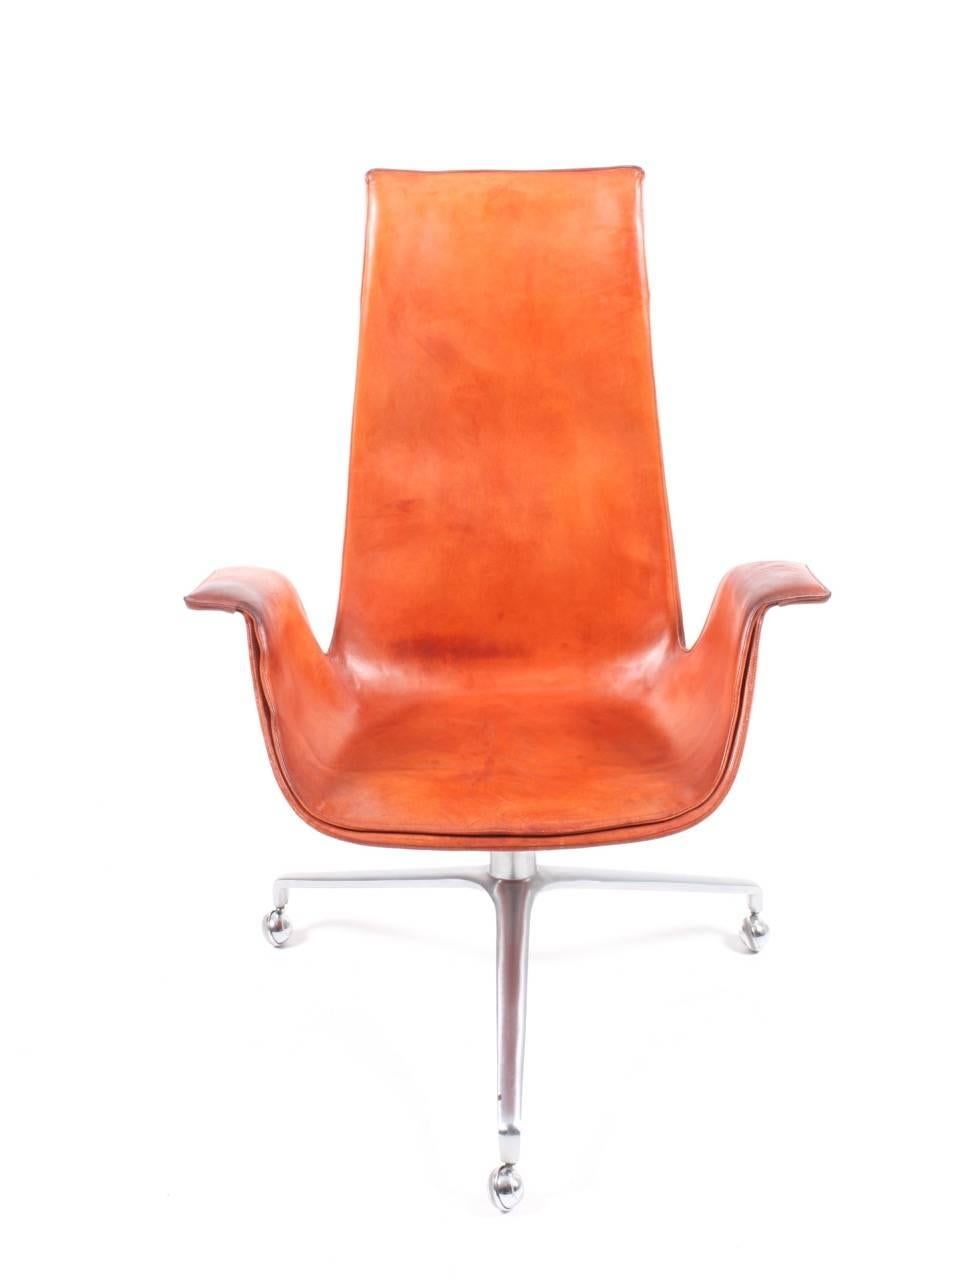 Swivel chair in beautiful patinated leather designed by architects Preben Fabricius & Jørgen Kastholm for Bovirke / Bo-Ex. Made in Denmark. This is the original version on the three legged base. Great original condition.